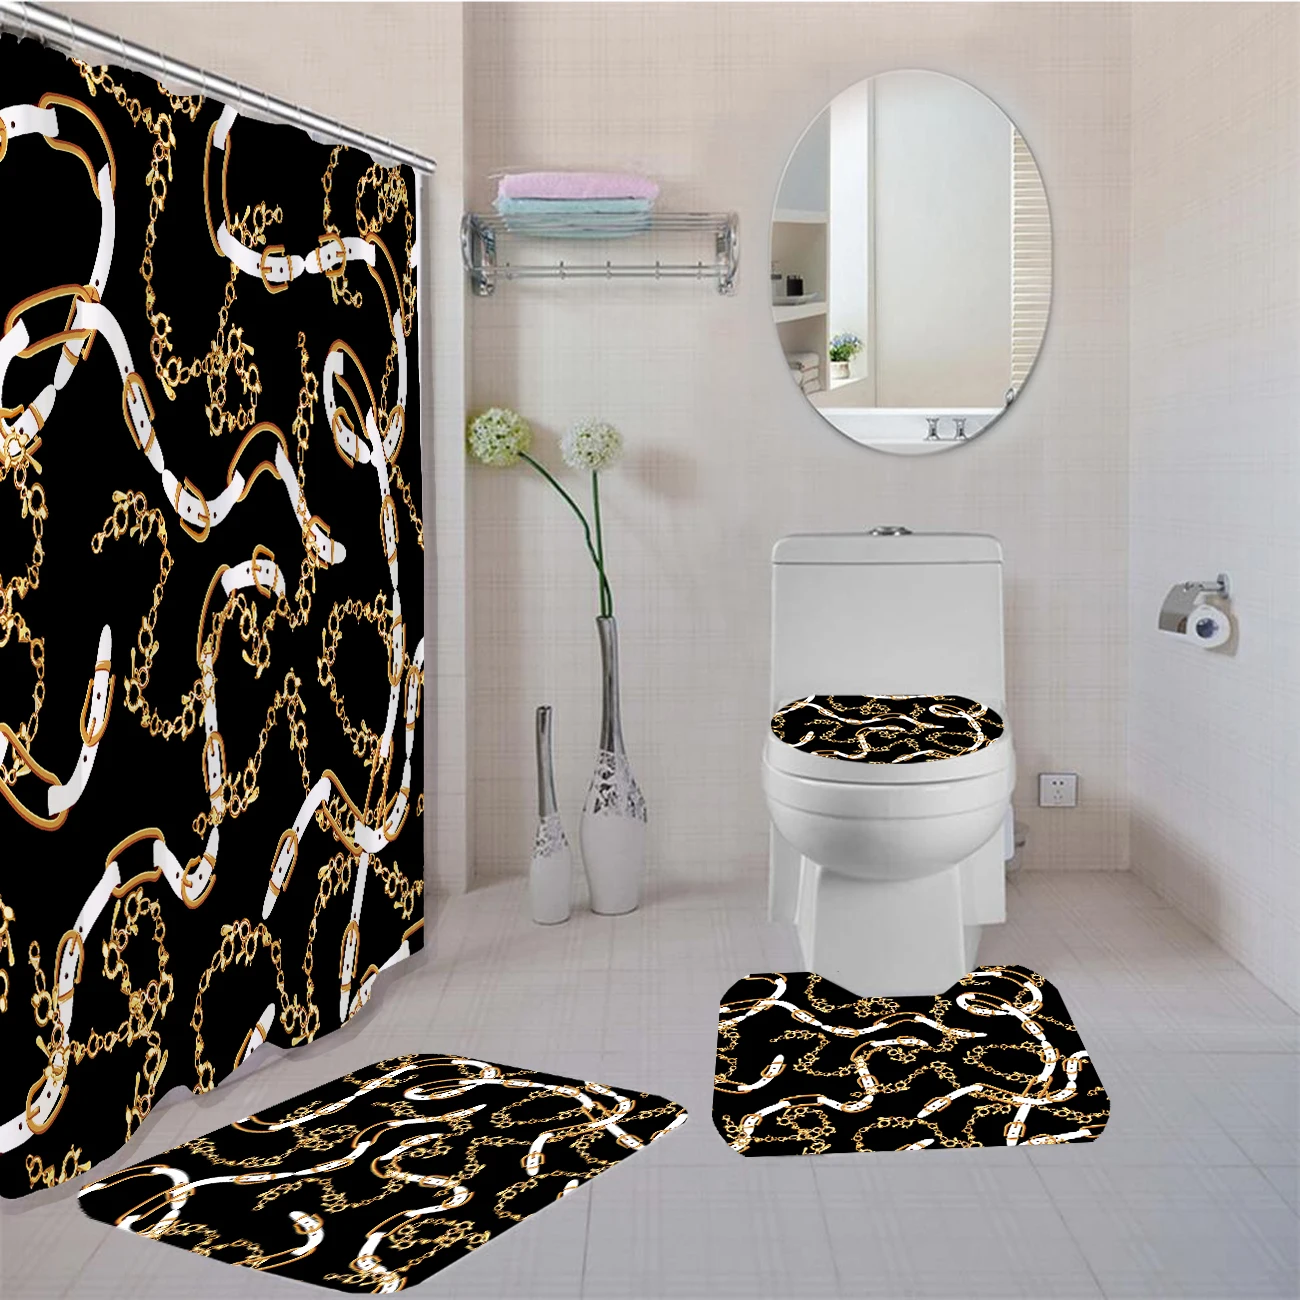 4 Pieces Retro Golden Chain Shower Curtain Sets With Bath Rug Toilet Cover Floor Mat Waterproof Bath Curtain Vintage Style enlarge